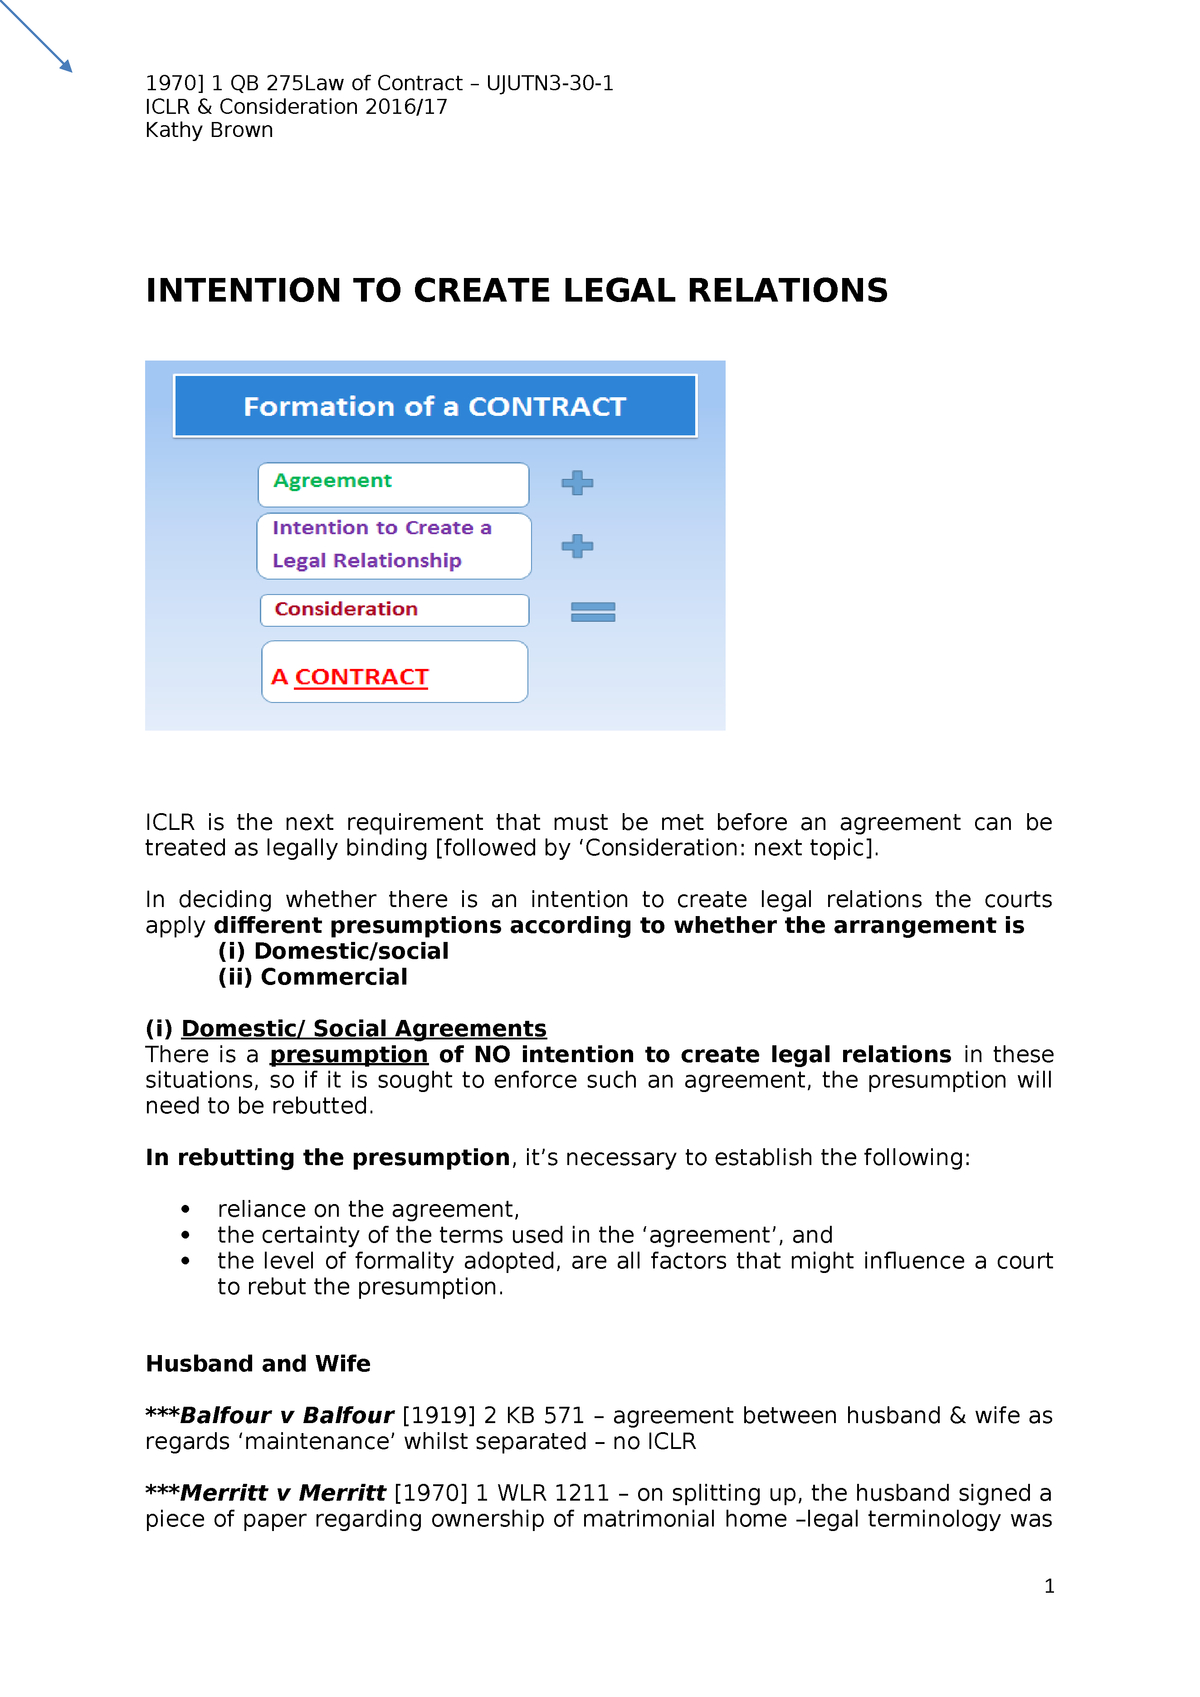 Separate Maintenance Agreement Iclrconsideration Contract Law Studocu